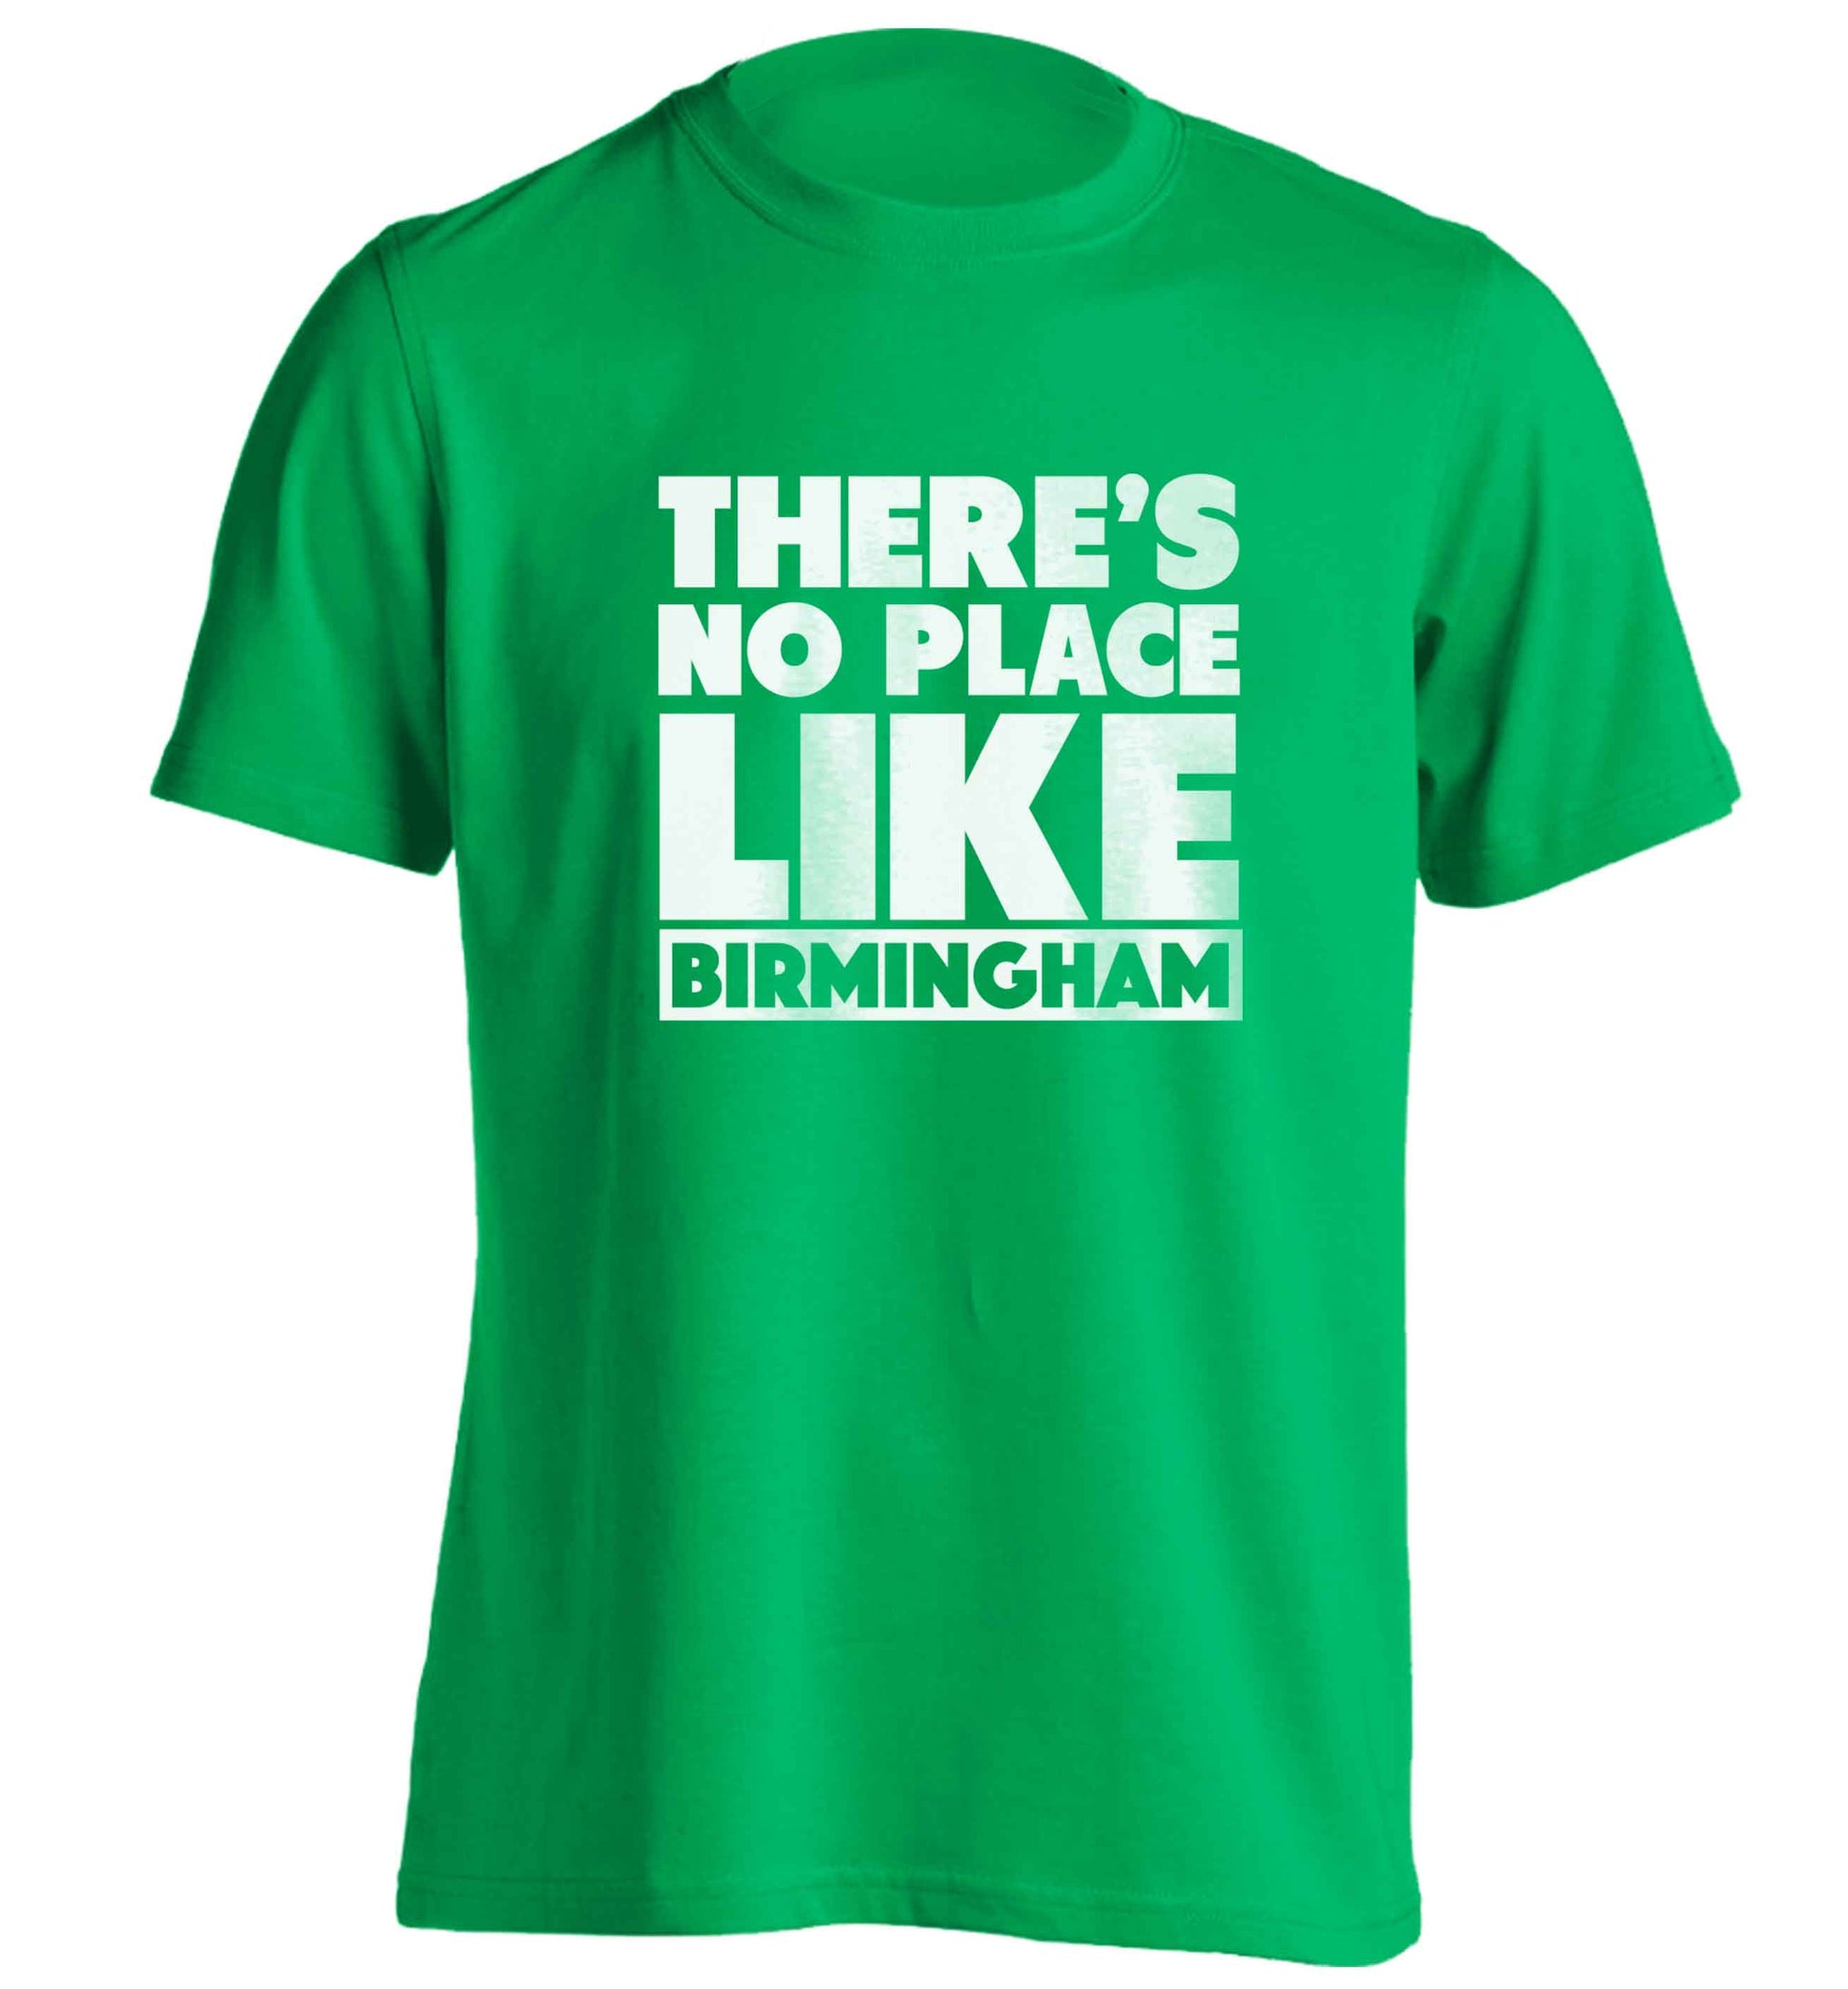 There's no place like Birmingham adults unisex green Tshirt 2XL